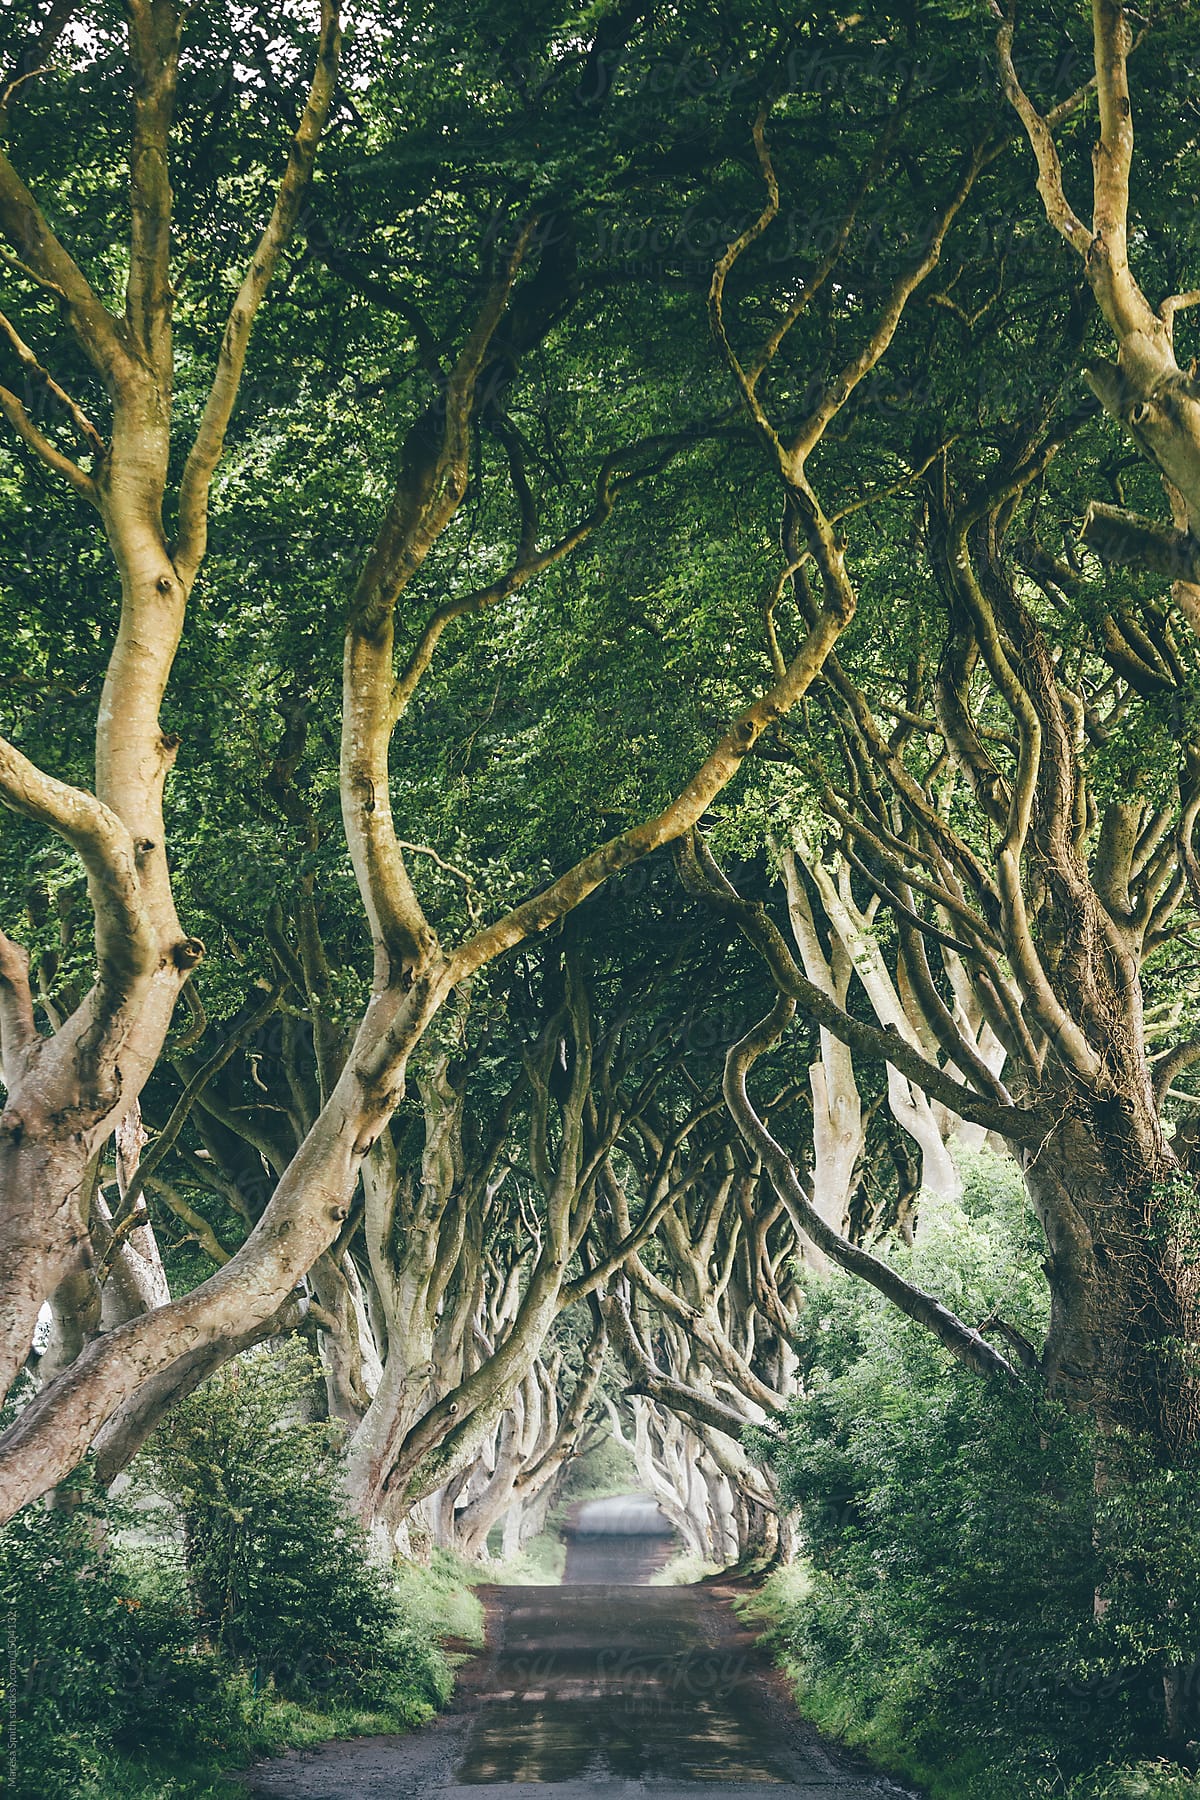 The Dark Hedges Northern Ireland A Tunnel Of Wrangled Beech Trees On A Rainy Day By Maresa Smith